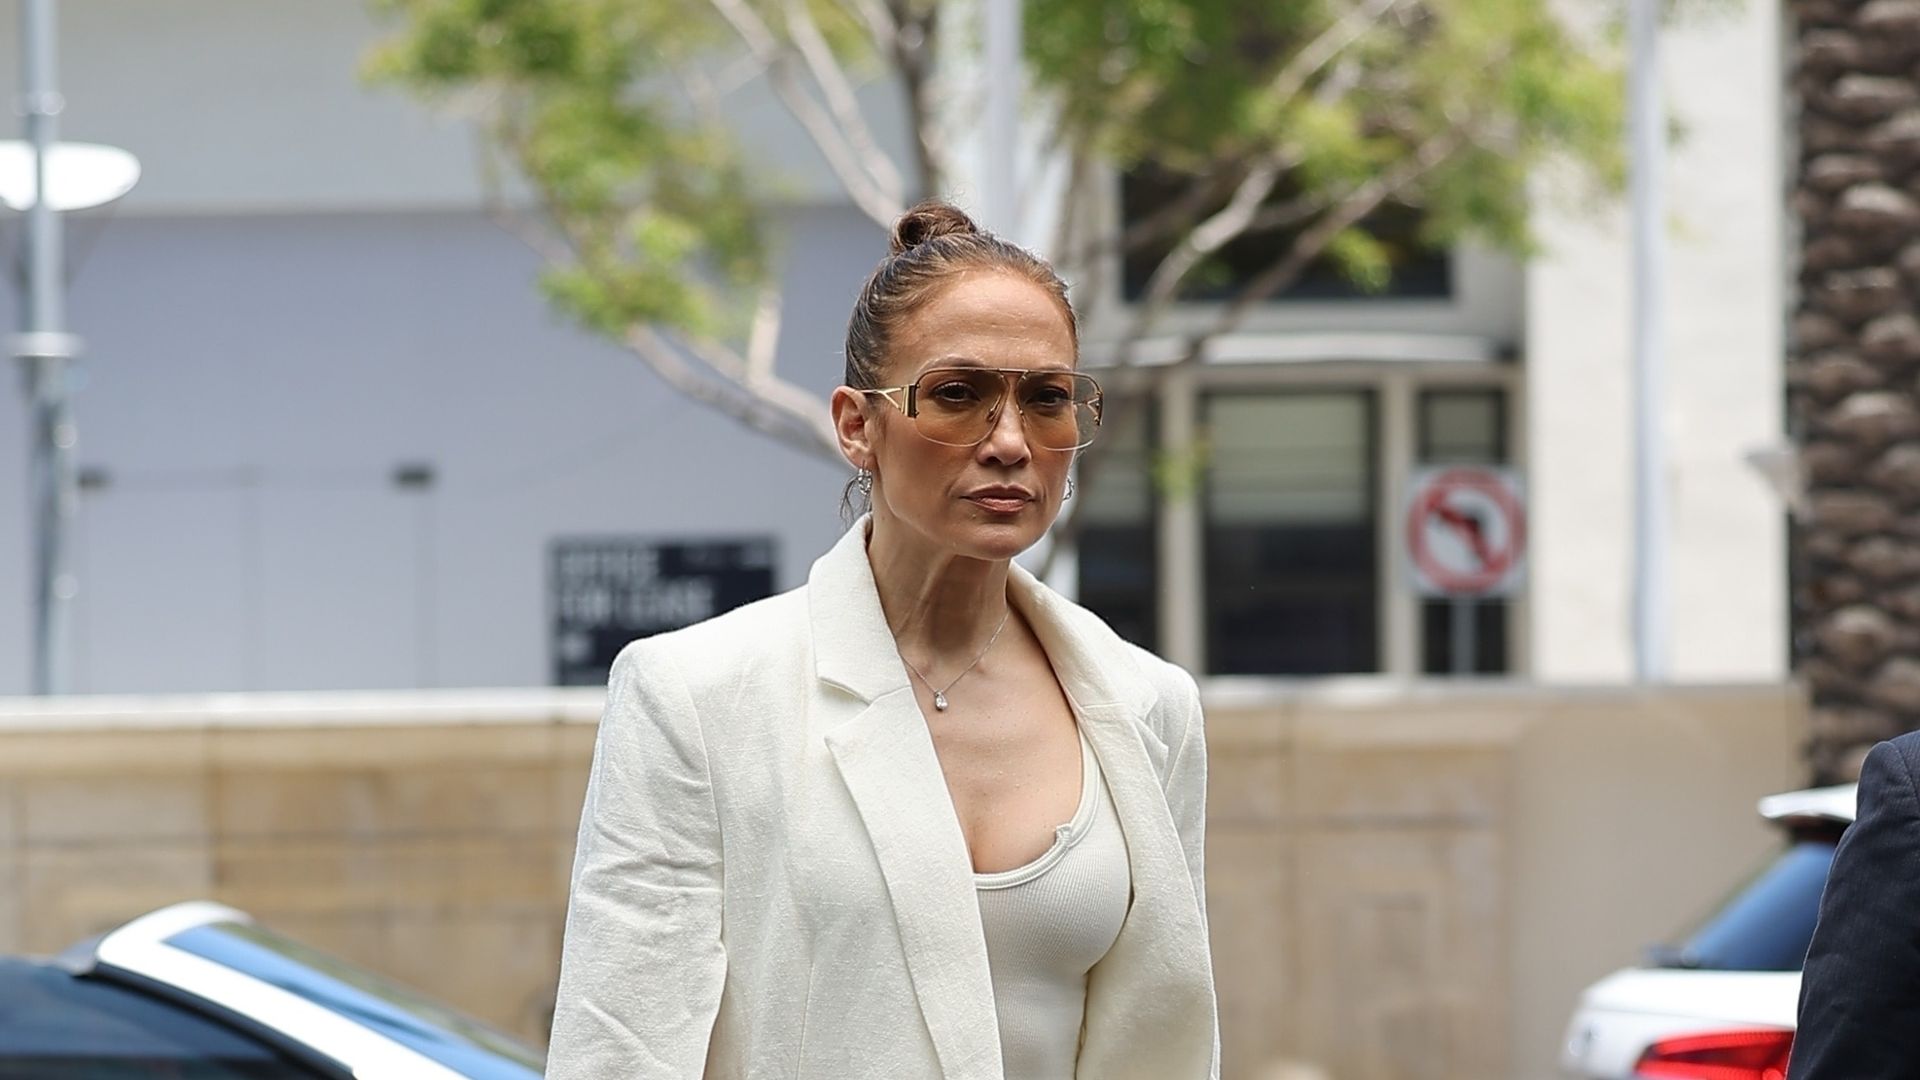 Jennifer Lopez was spotted arriving at The Maybourne Beverly Hills, looking chic and elegant in a cream suit.

